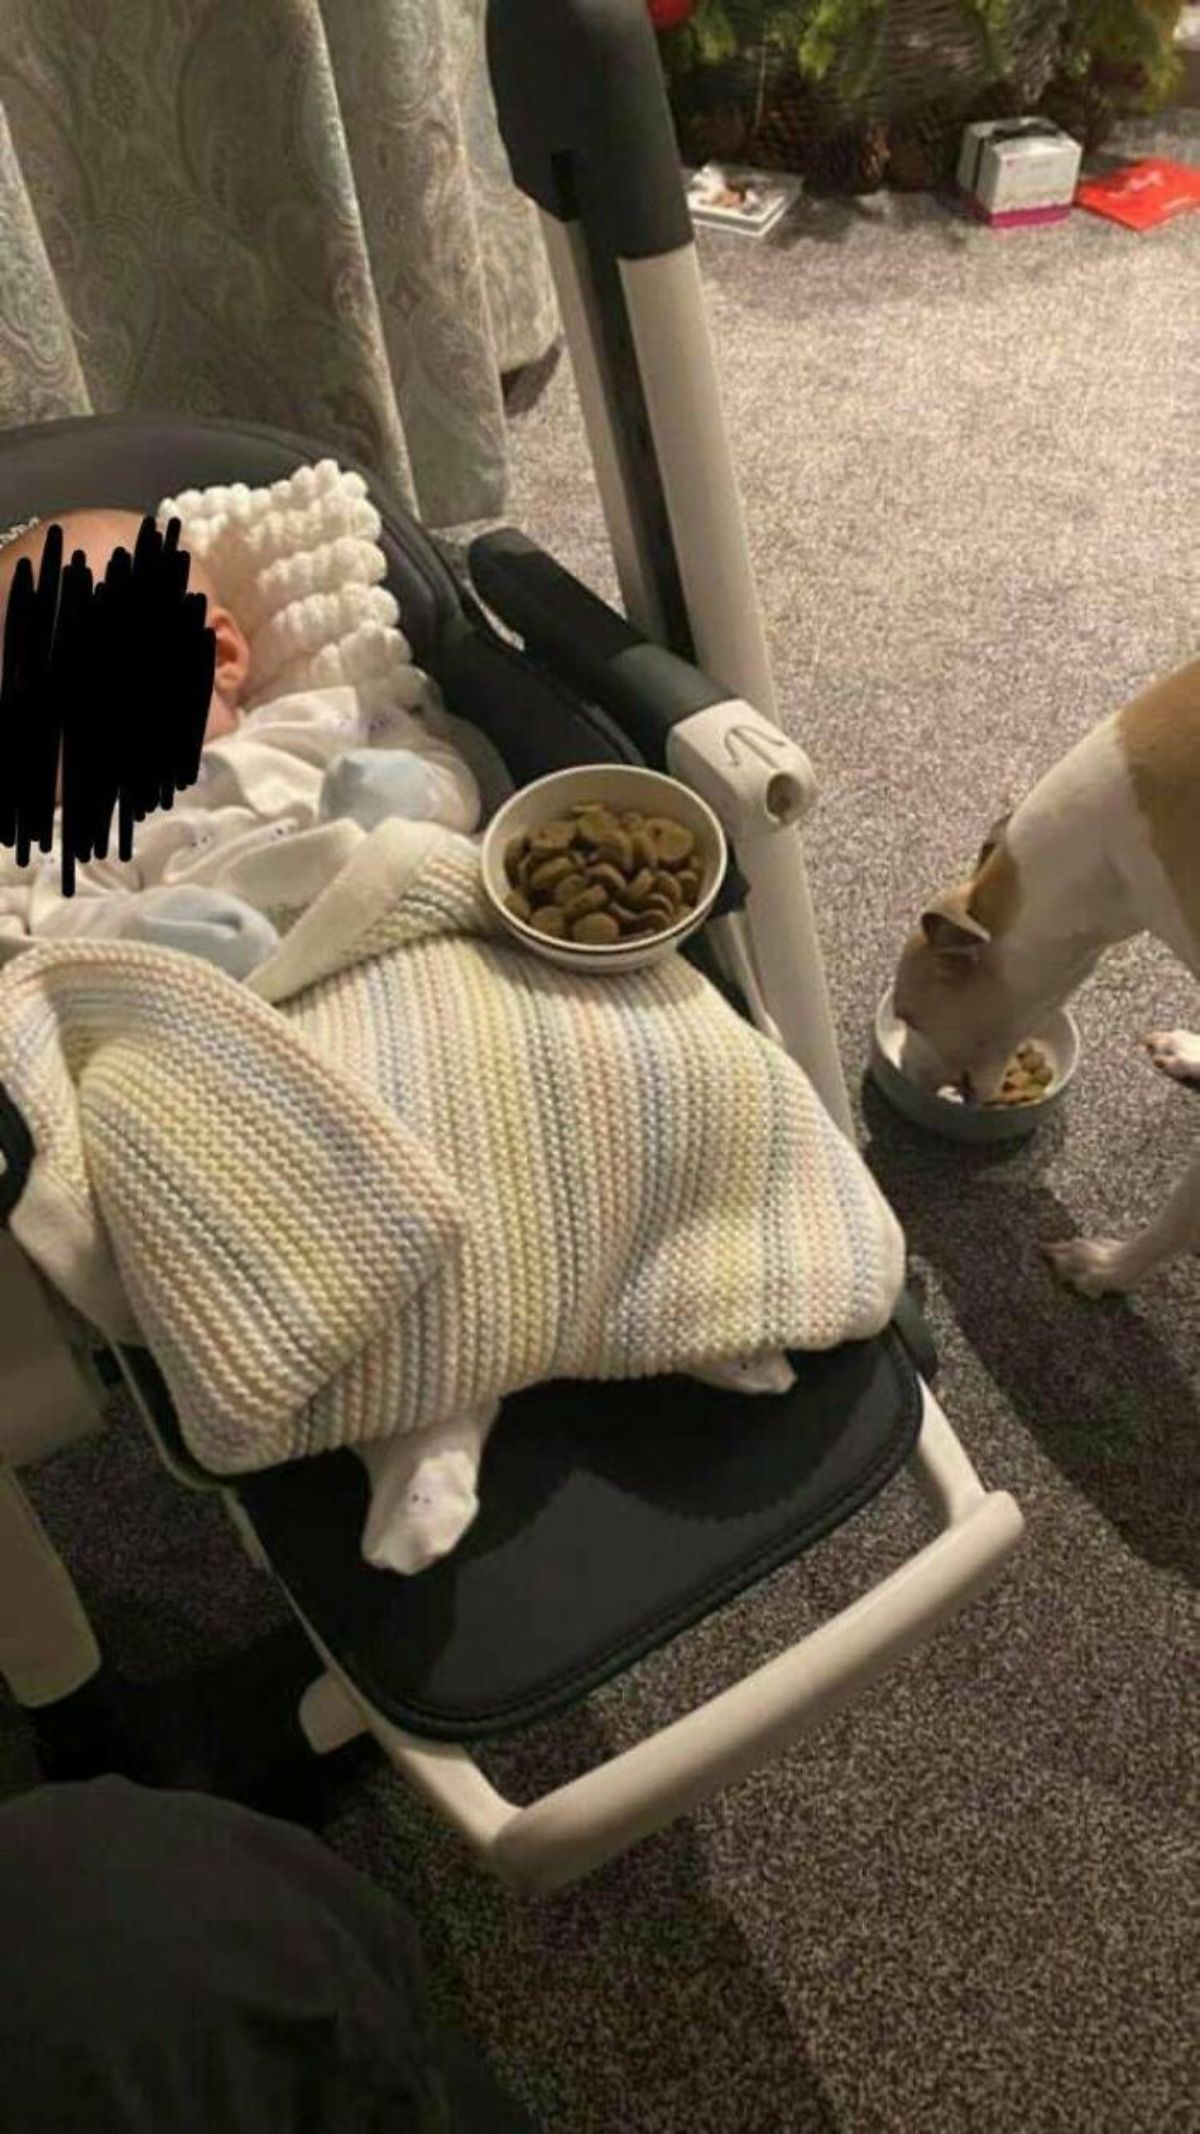 brown and white dog eating dog food with a bowl of dog food next to a baby